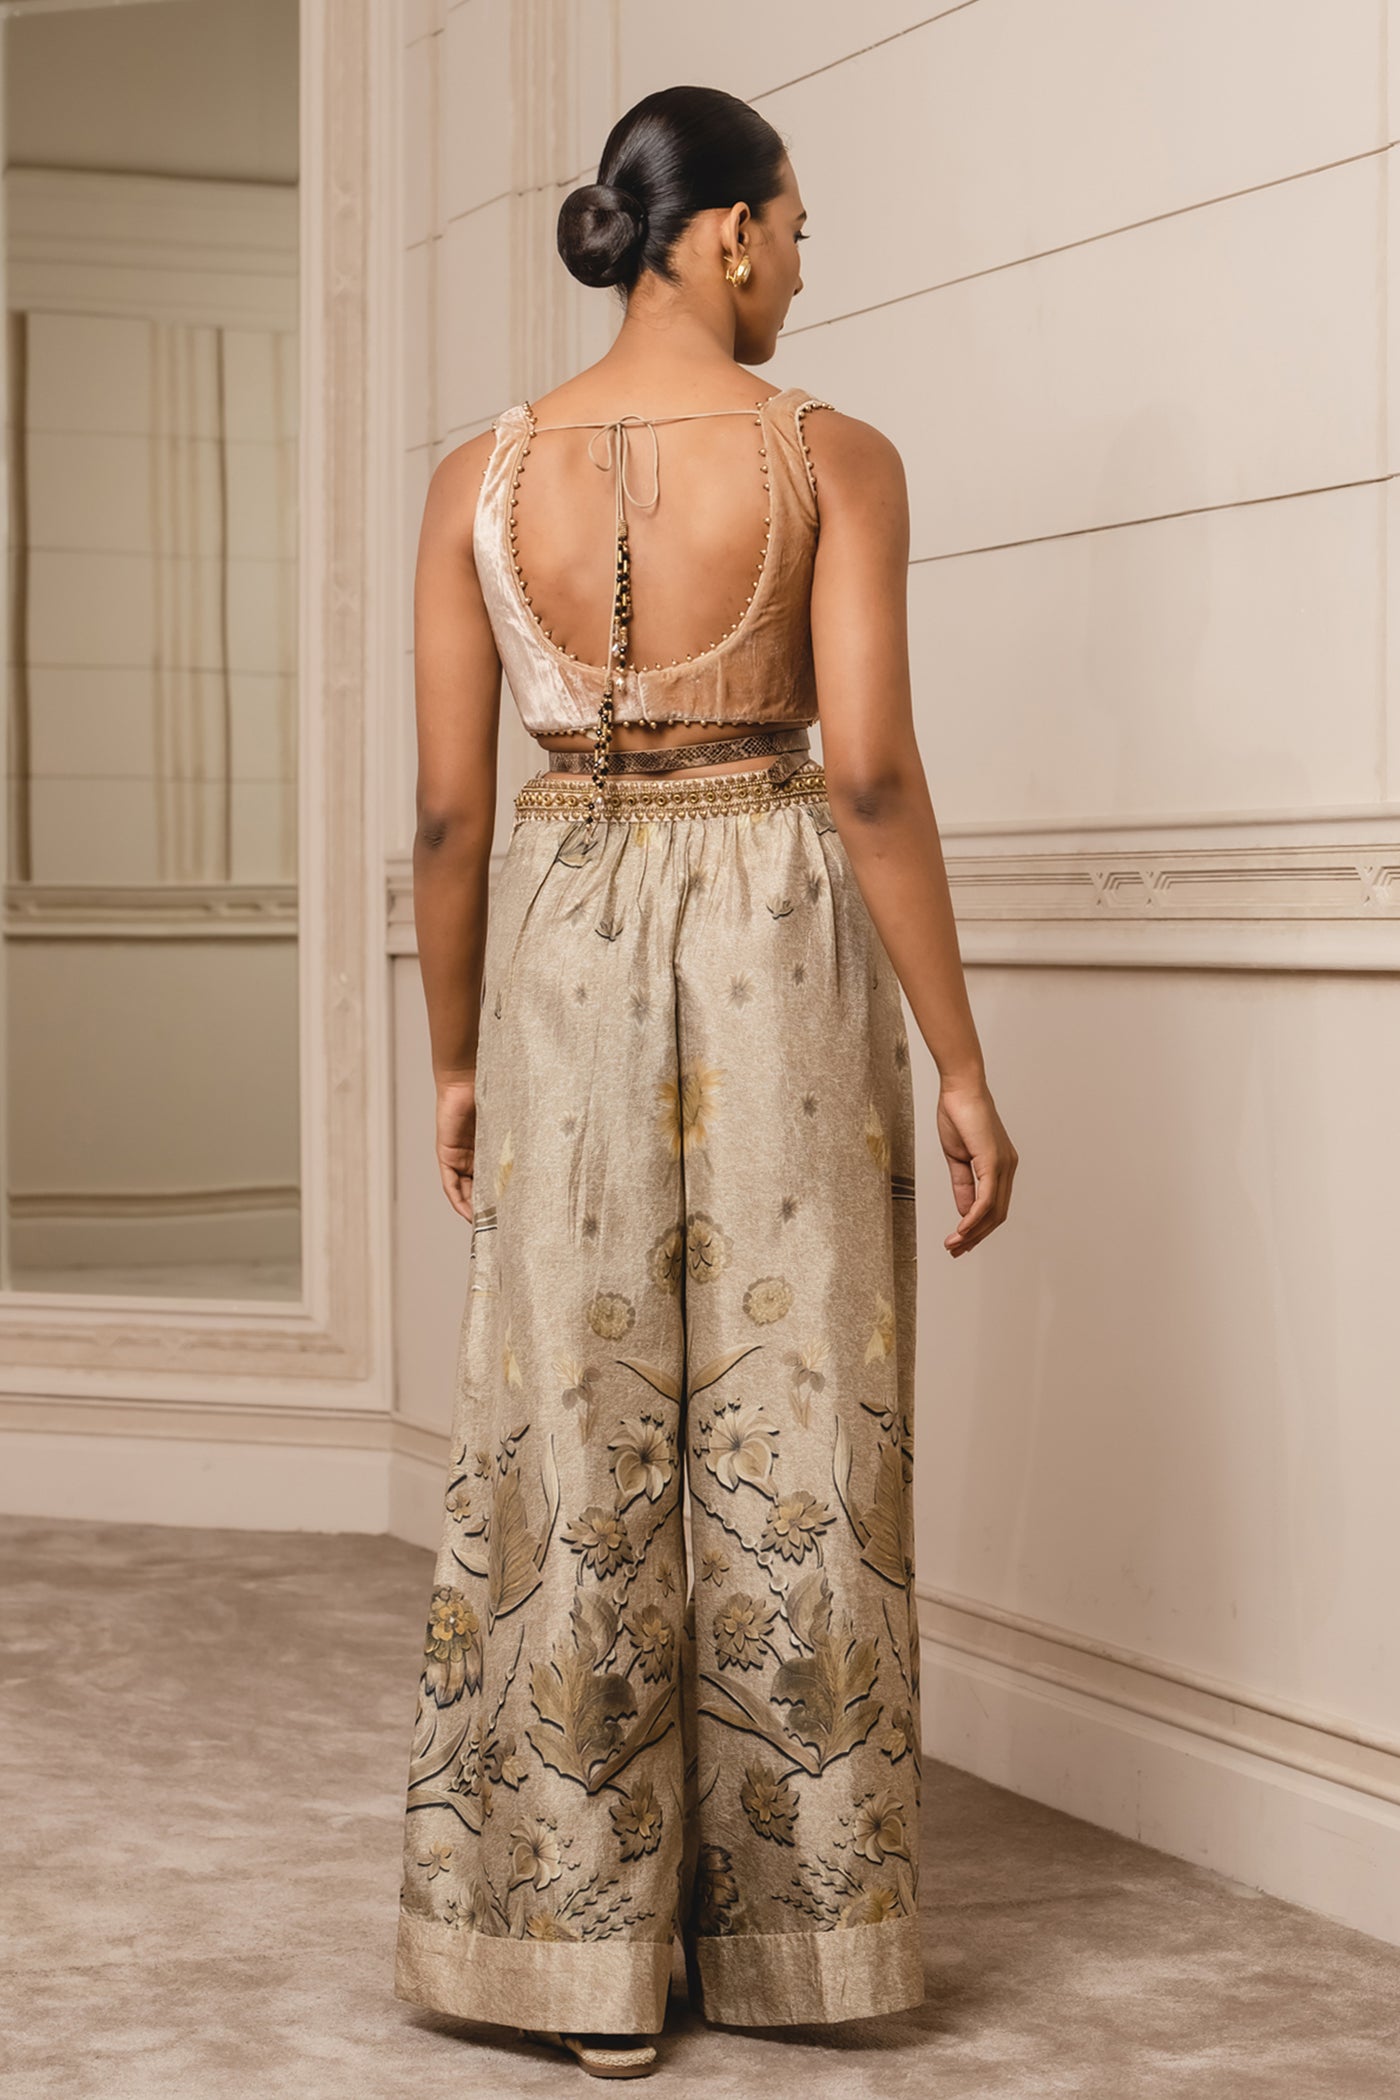 Tarun Tahiliani Printed Jacket With Bustier And Trousers gold festive indian designer wear online shopping melange singapore